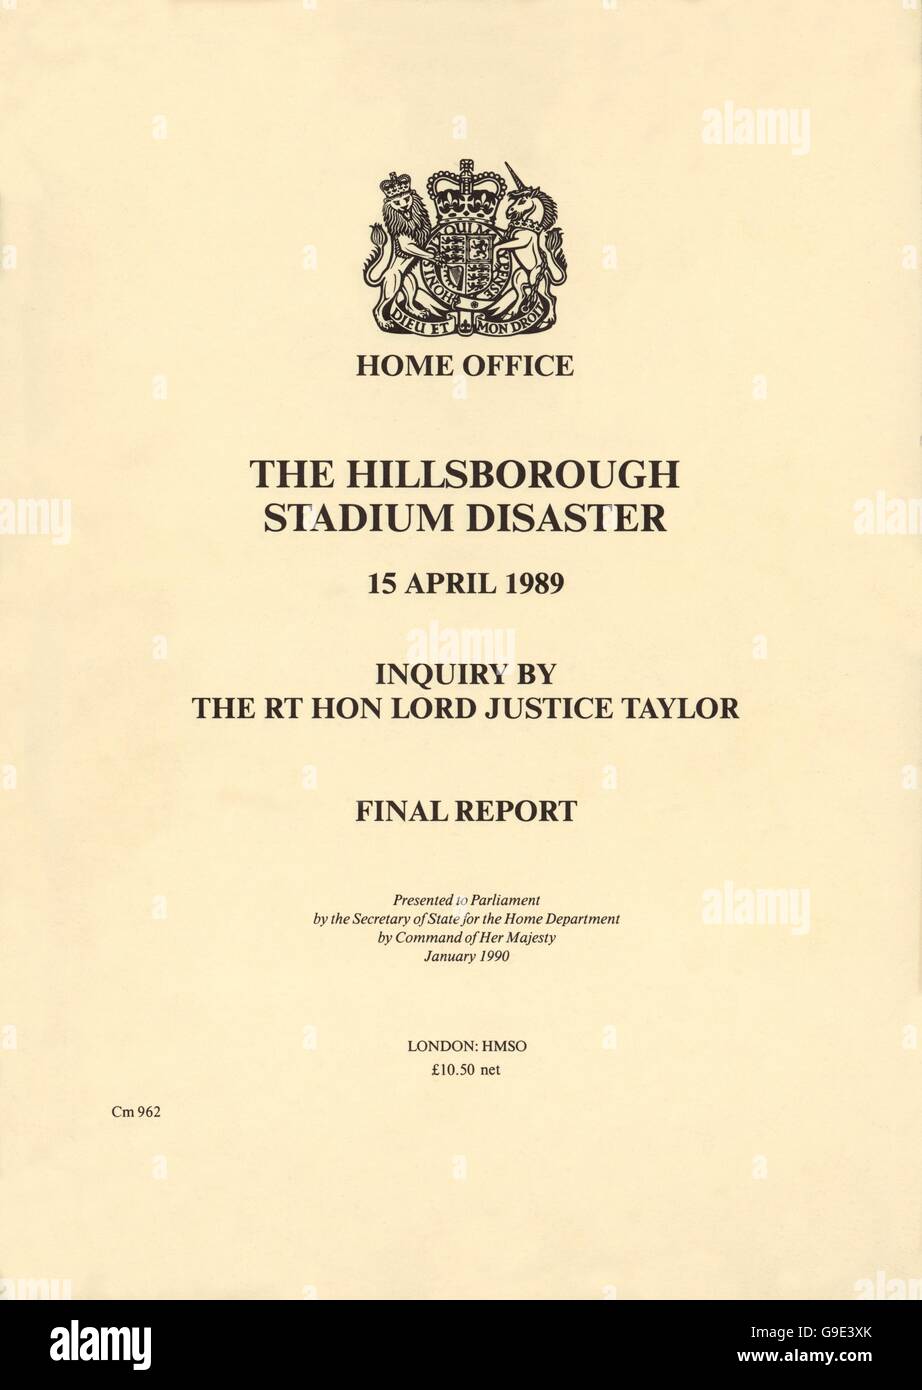 The front cover of the inquiry by the Rt Hon Lord Justice Taylor into the  Hillsborough Stadium Disaster Stock Photo - Alamy